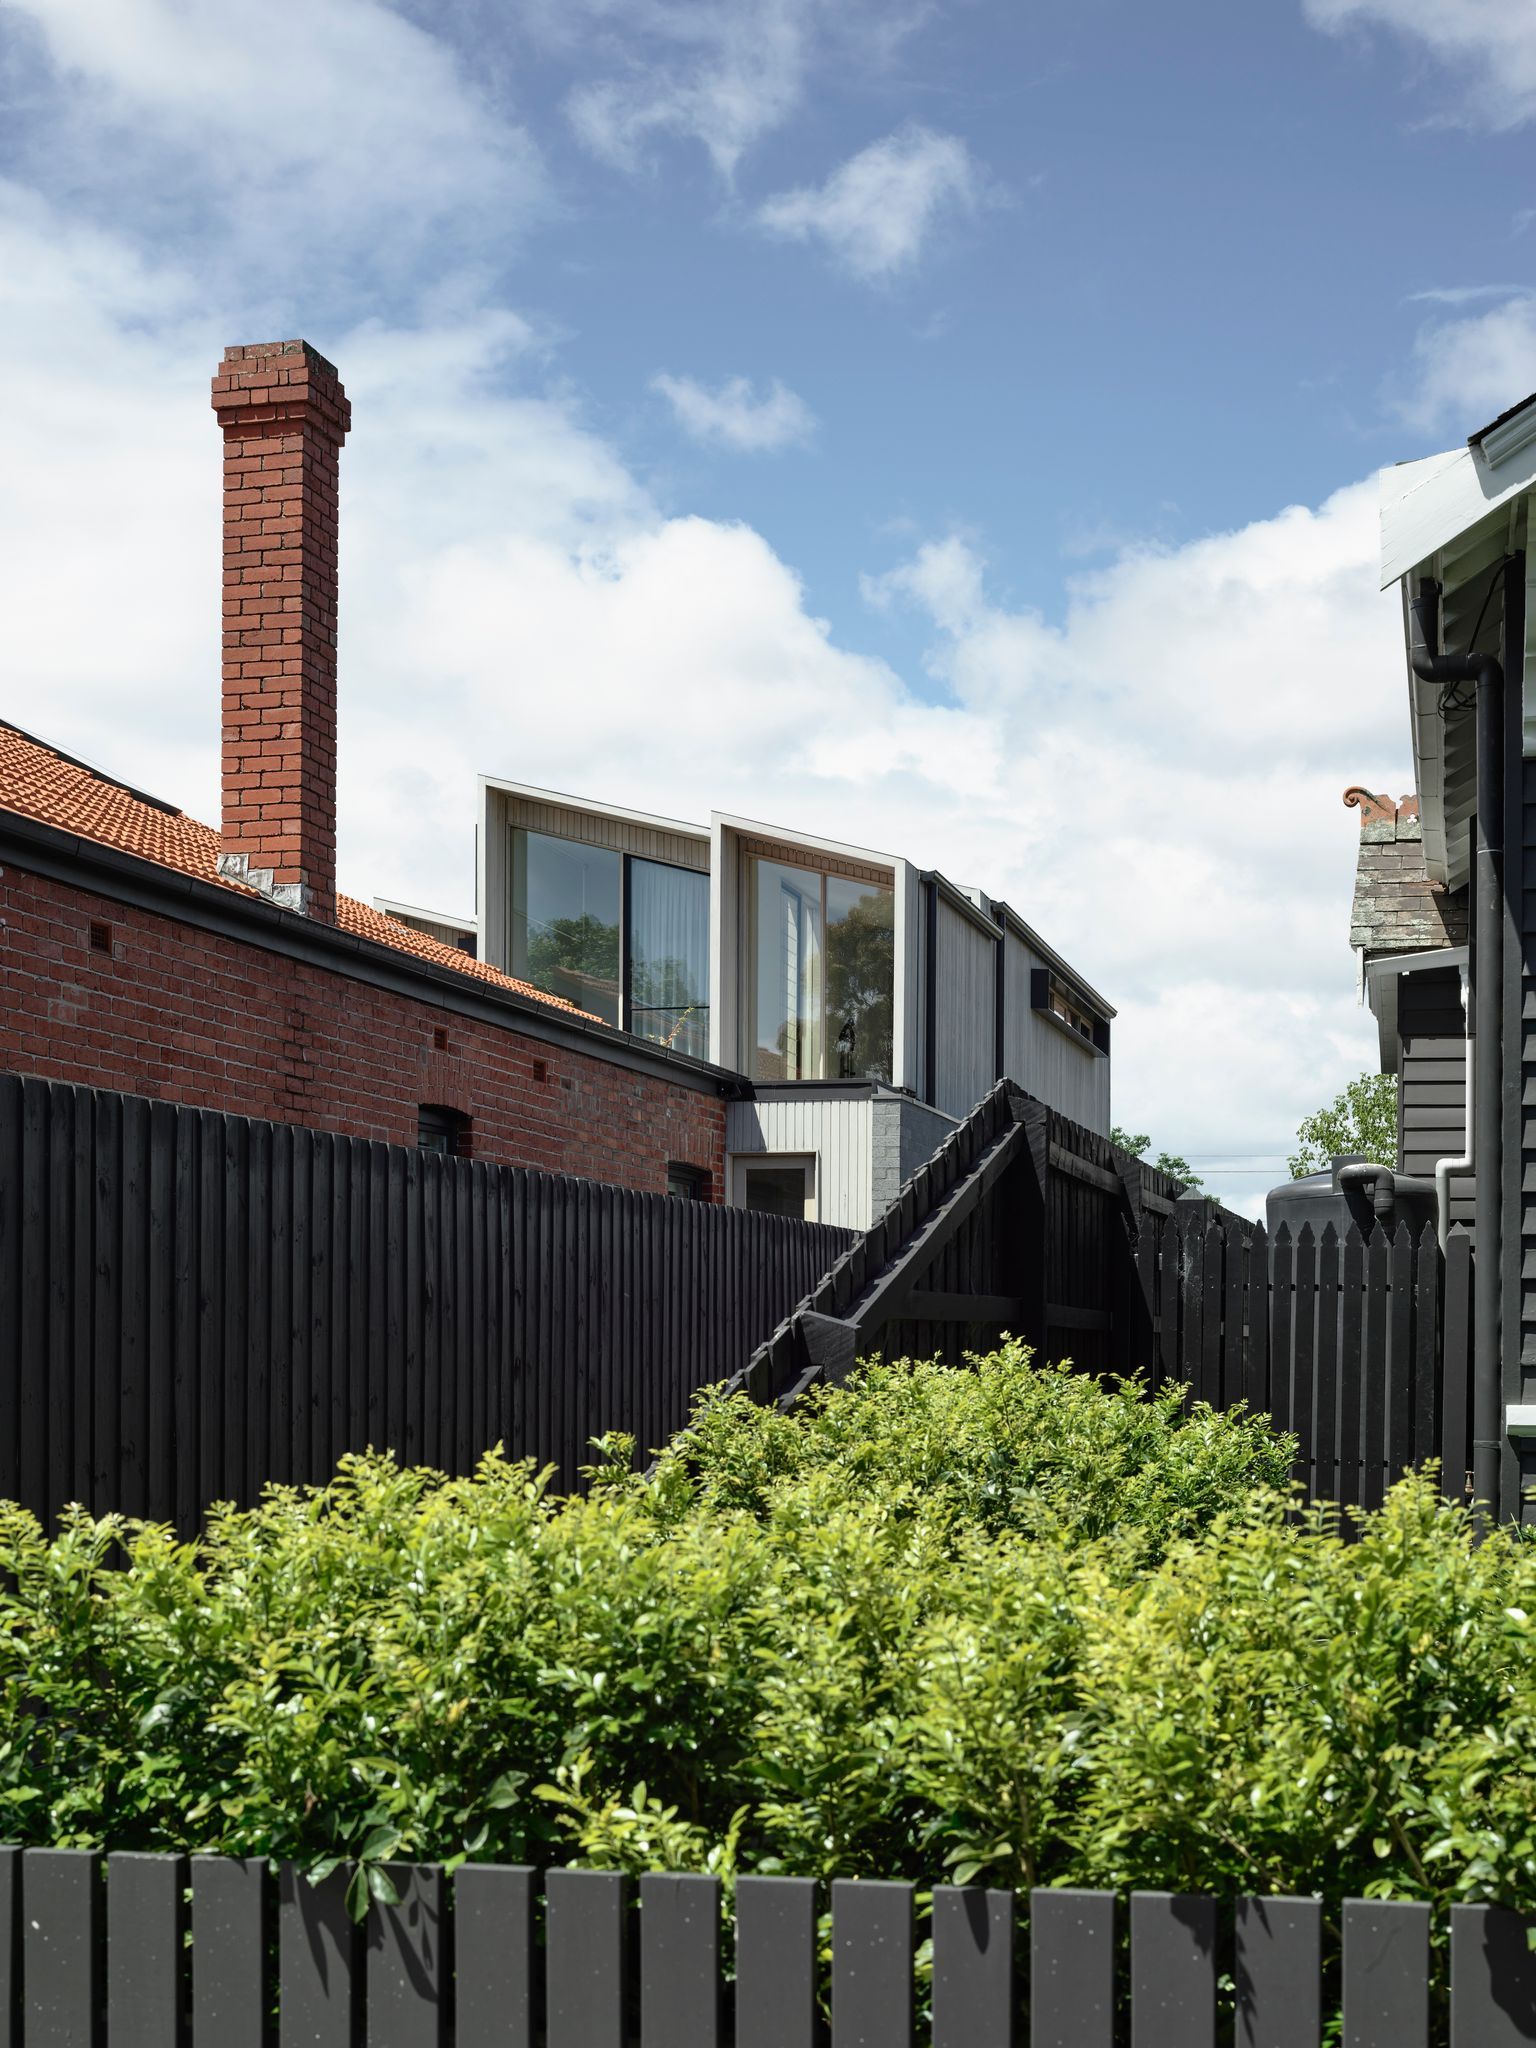 Silvertop House by Tom Robertson Architects. View from street showcasing original home and rear extension